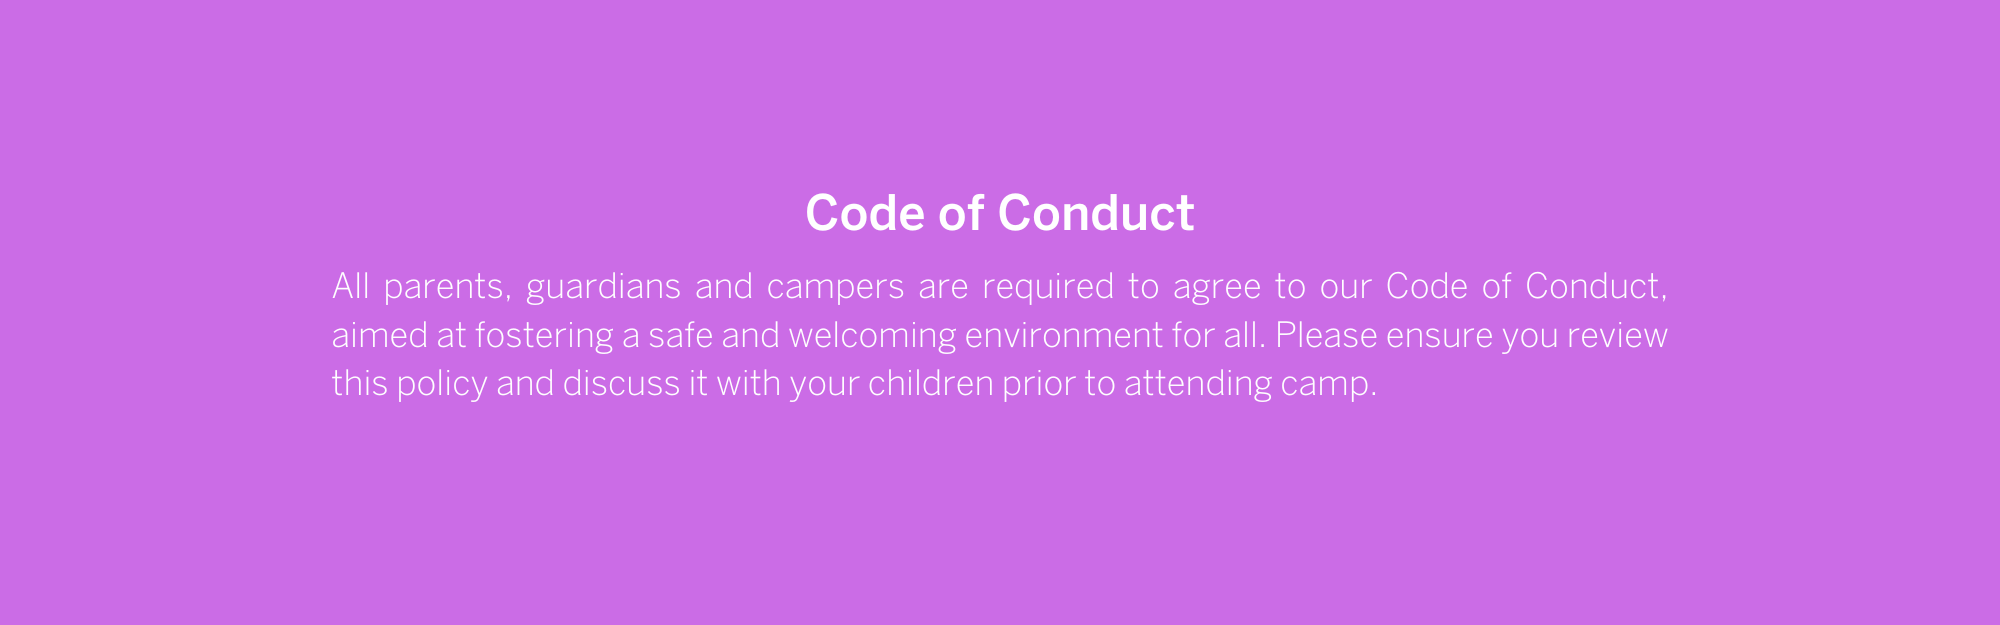 Code of Conduct All parents, guardians and campers are required to agree to our Code of Conduct, aimed at fostering a safe and welcoming environment for all. Please ensure you review this policy and discuss it with your children prior to attending camp.